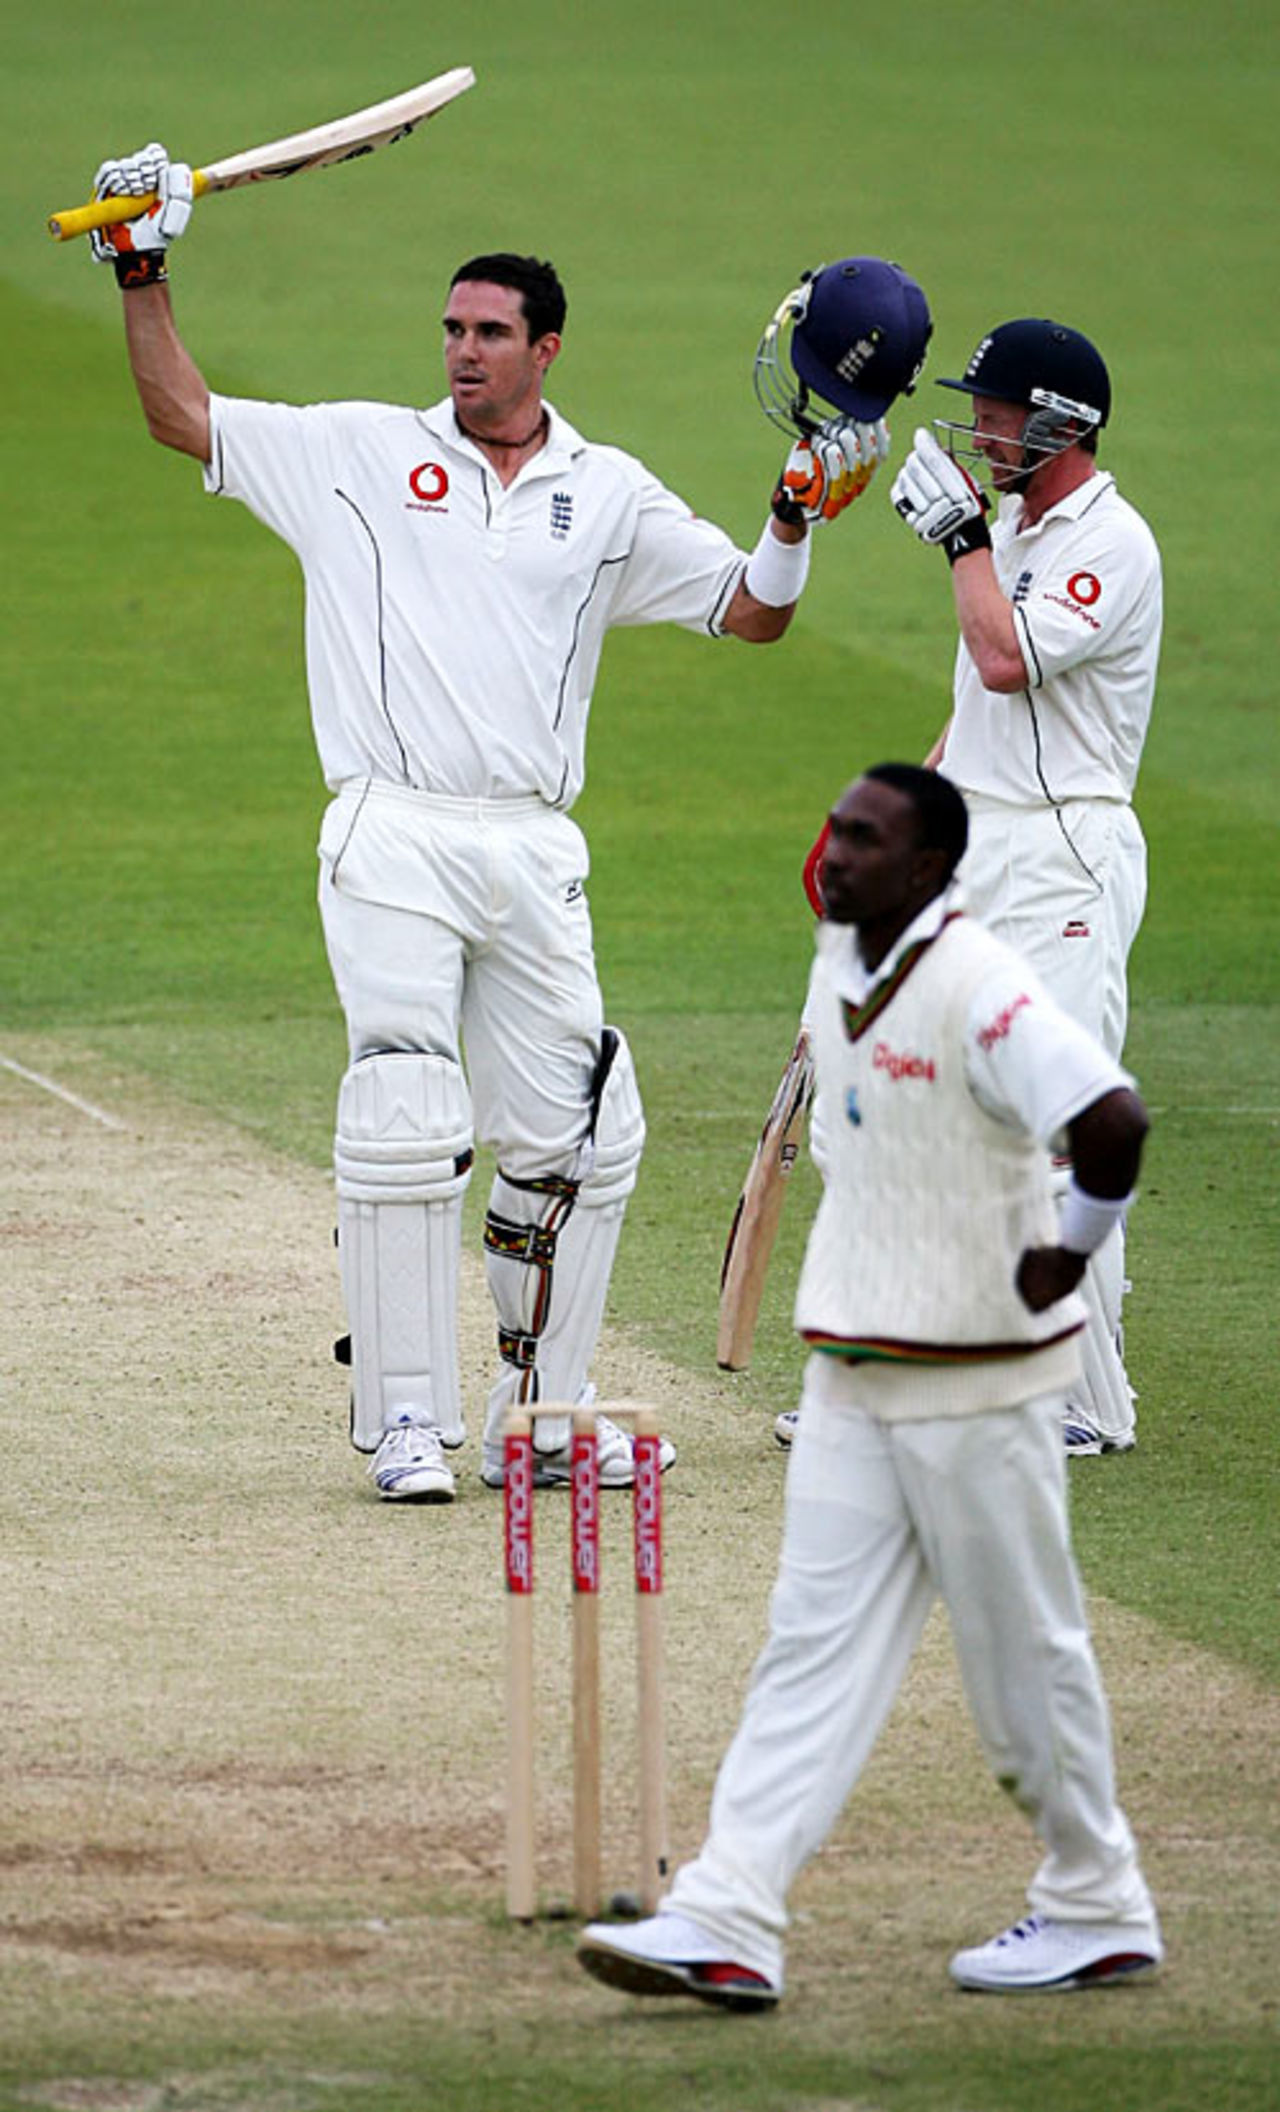 Kevin Pietersen celebrates his thrilling hundred, England v West Indies, 1st Test, Lord's, May 20, 2007